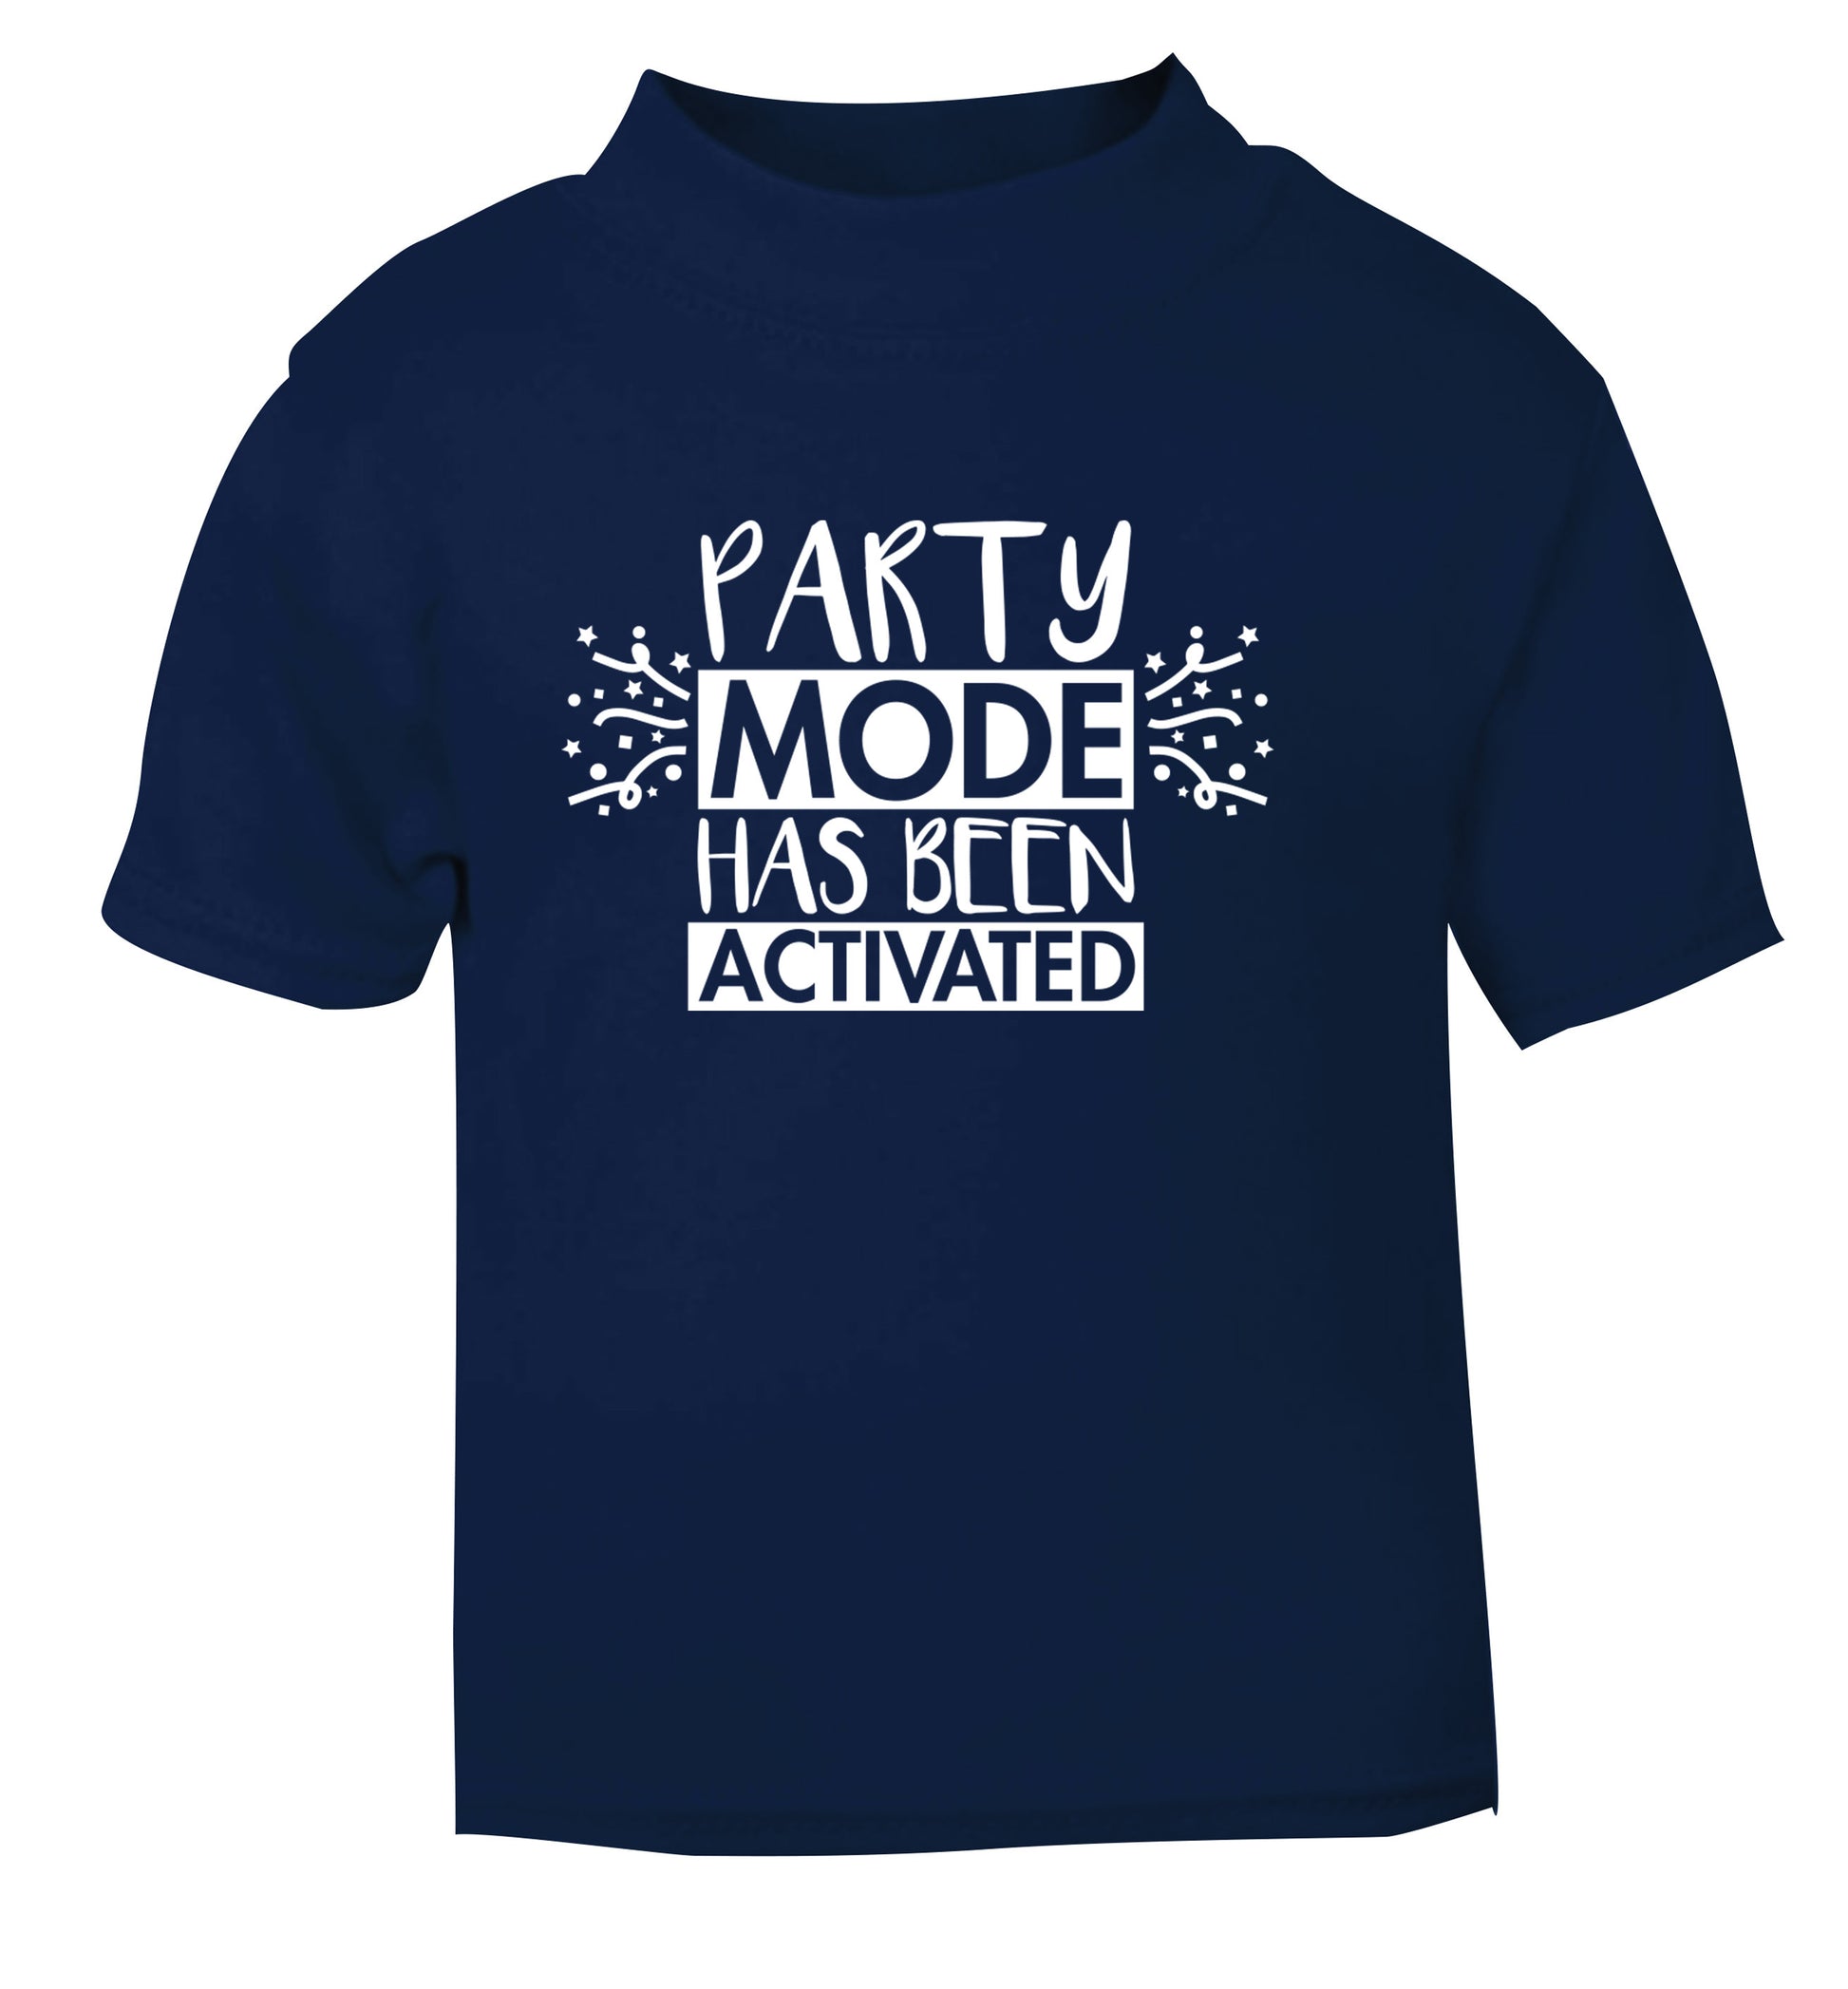 Please do not disturb party mode has been activated navy Baby Toddler Tshirt 2 Years